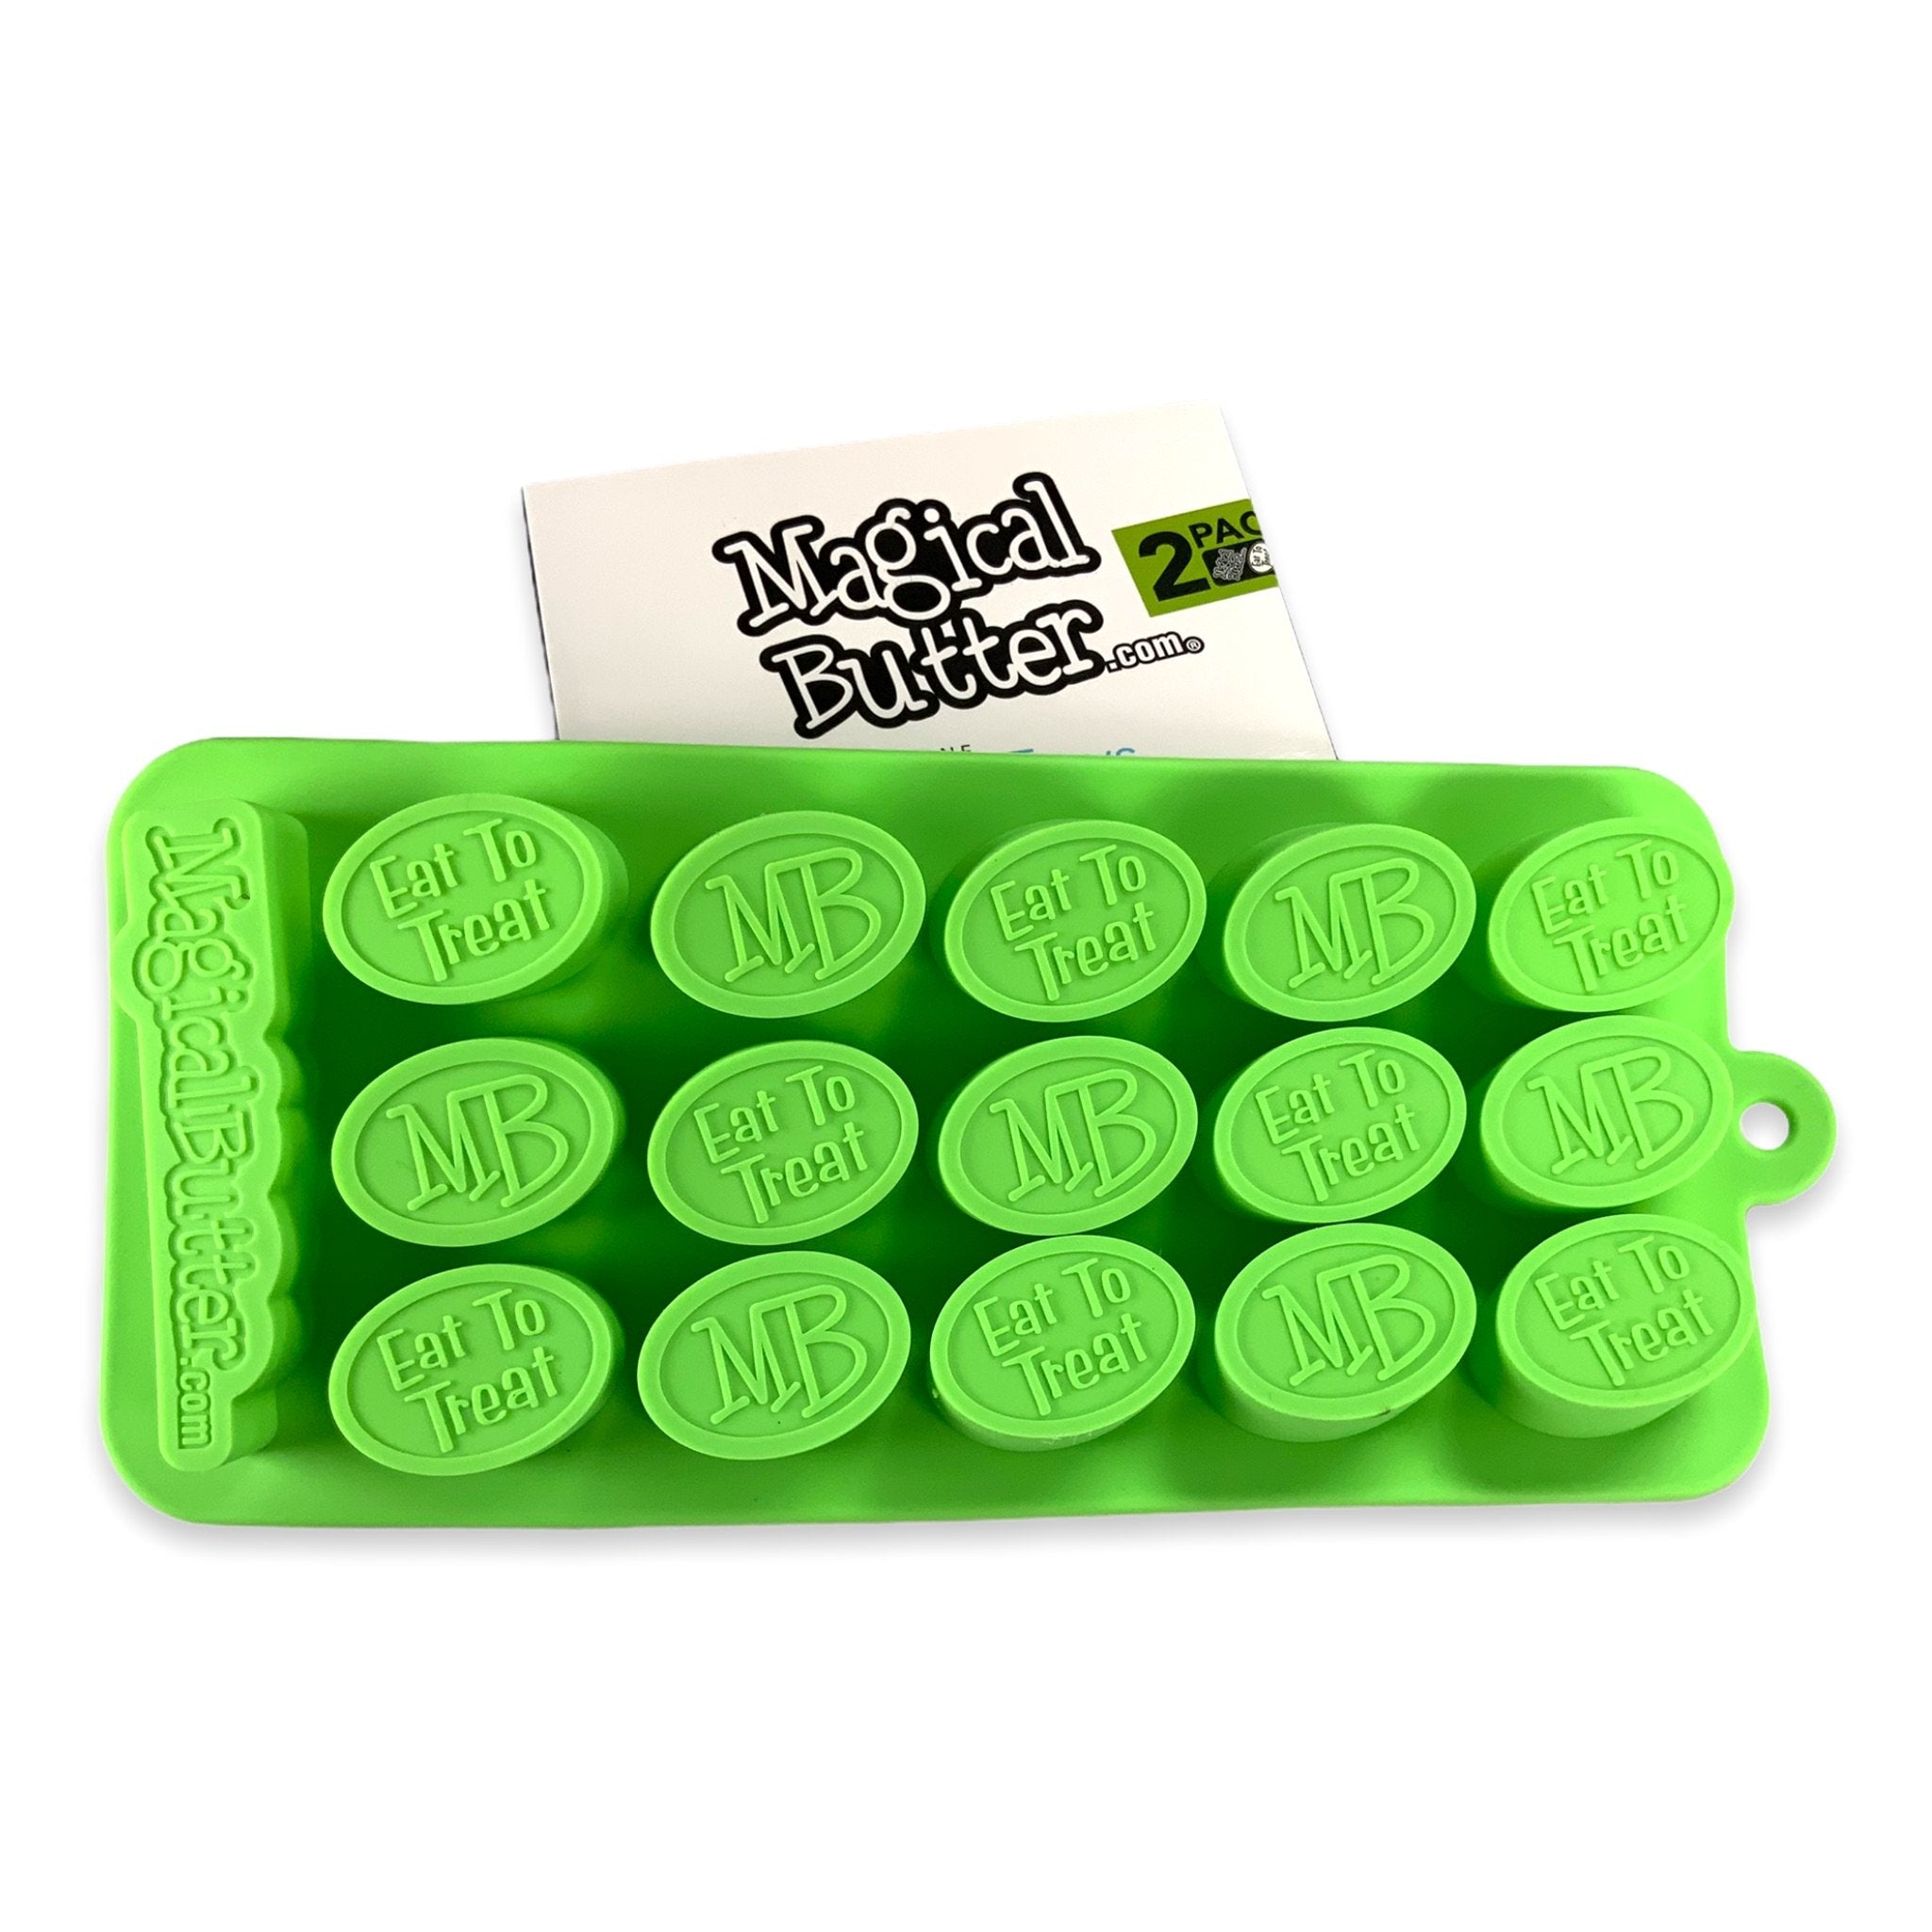 Magical Butter Eat to Treat Tray 2er Pack Details